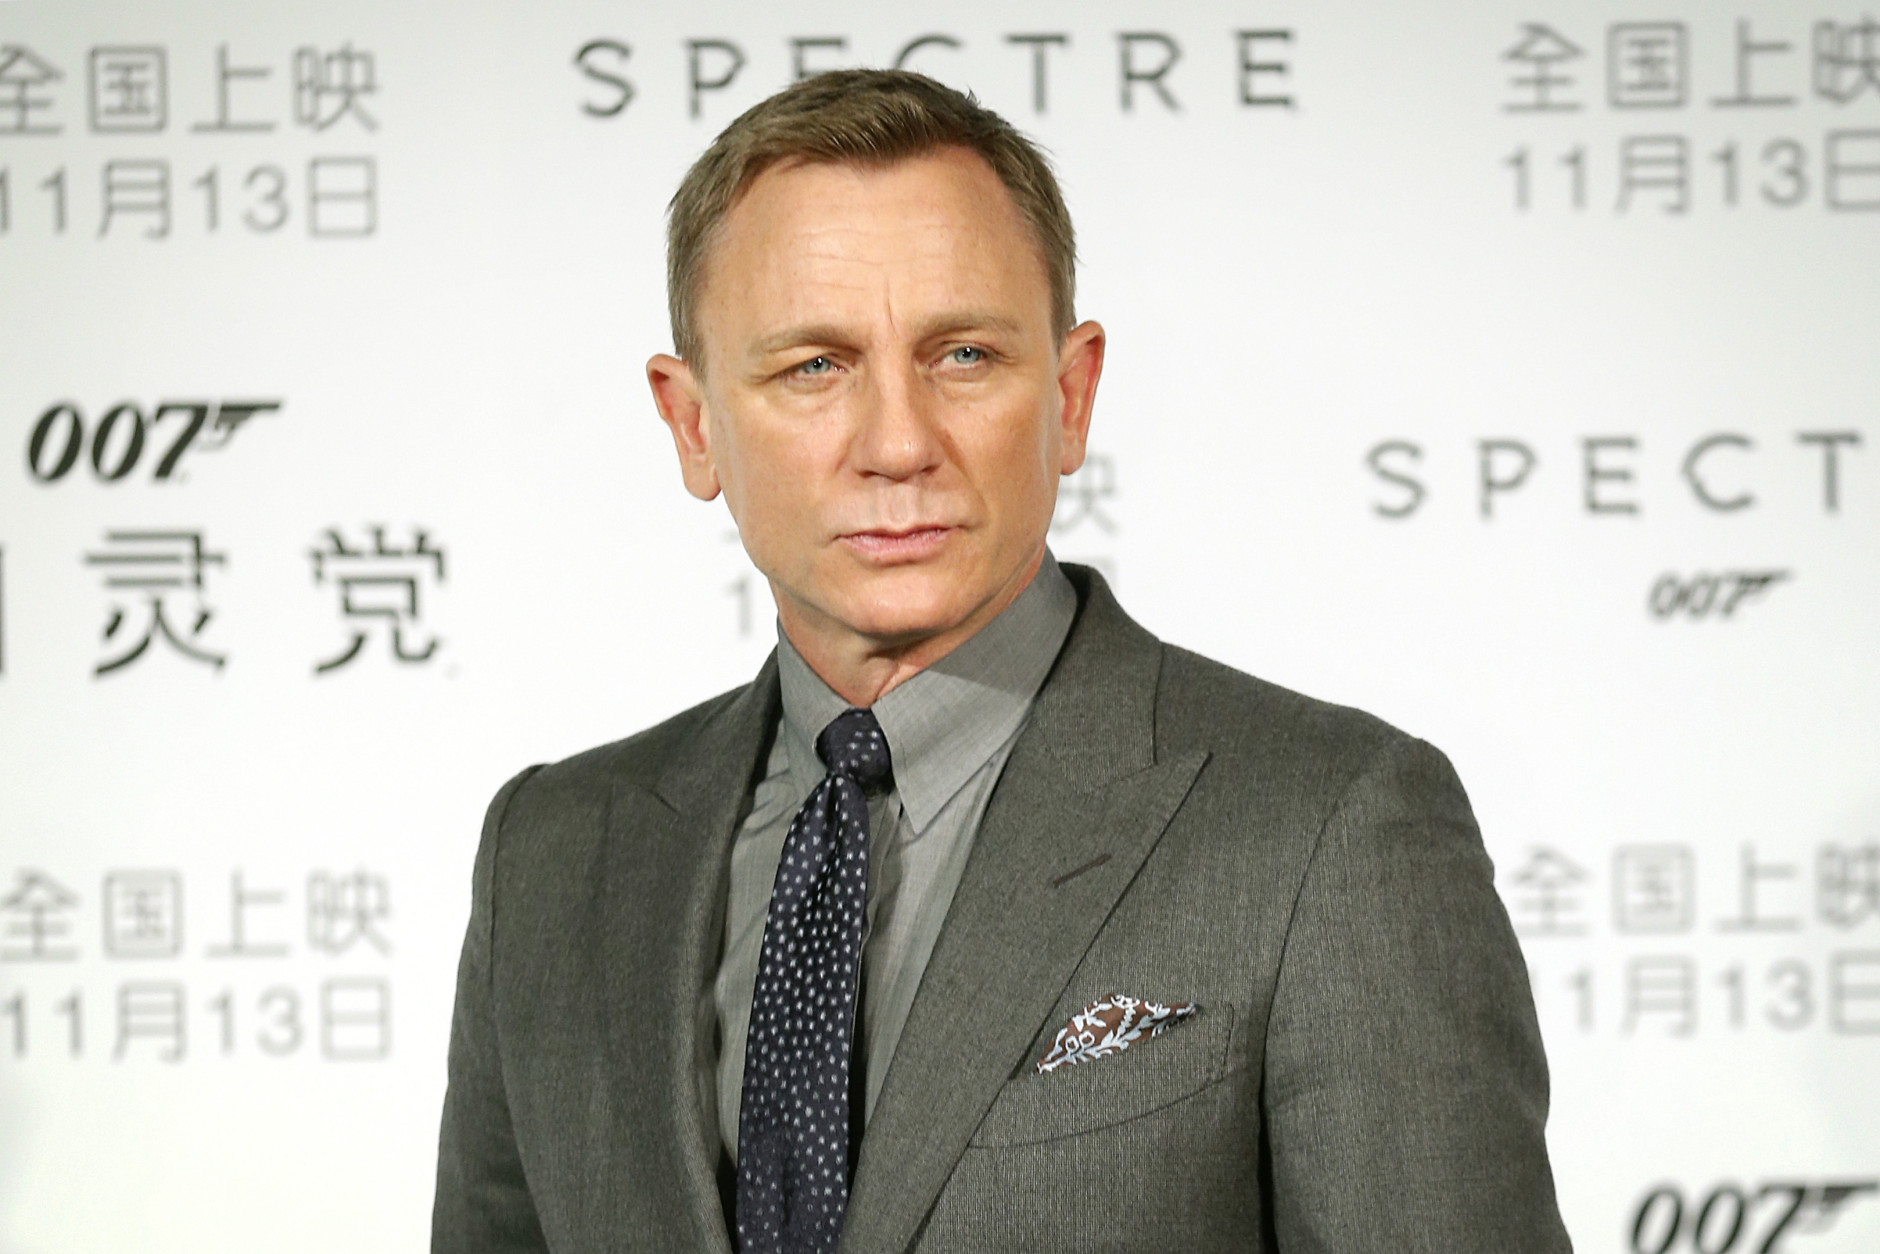 British actor Daniel Craig poses for photographers before a press conference for the movie "Spectre" in Beijing, Tuesday, Nov. 10, 2015. The film, the latest in the James Bond franchise, opens in China on Friday. (AP Photo/Mark Schiefelbein)